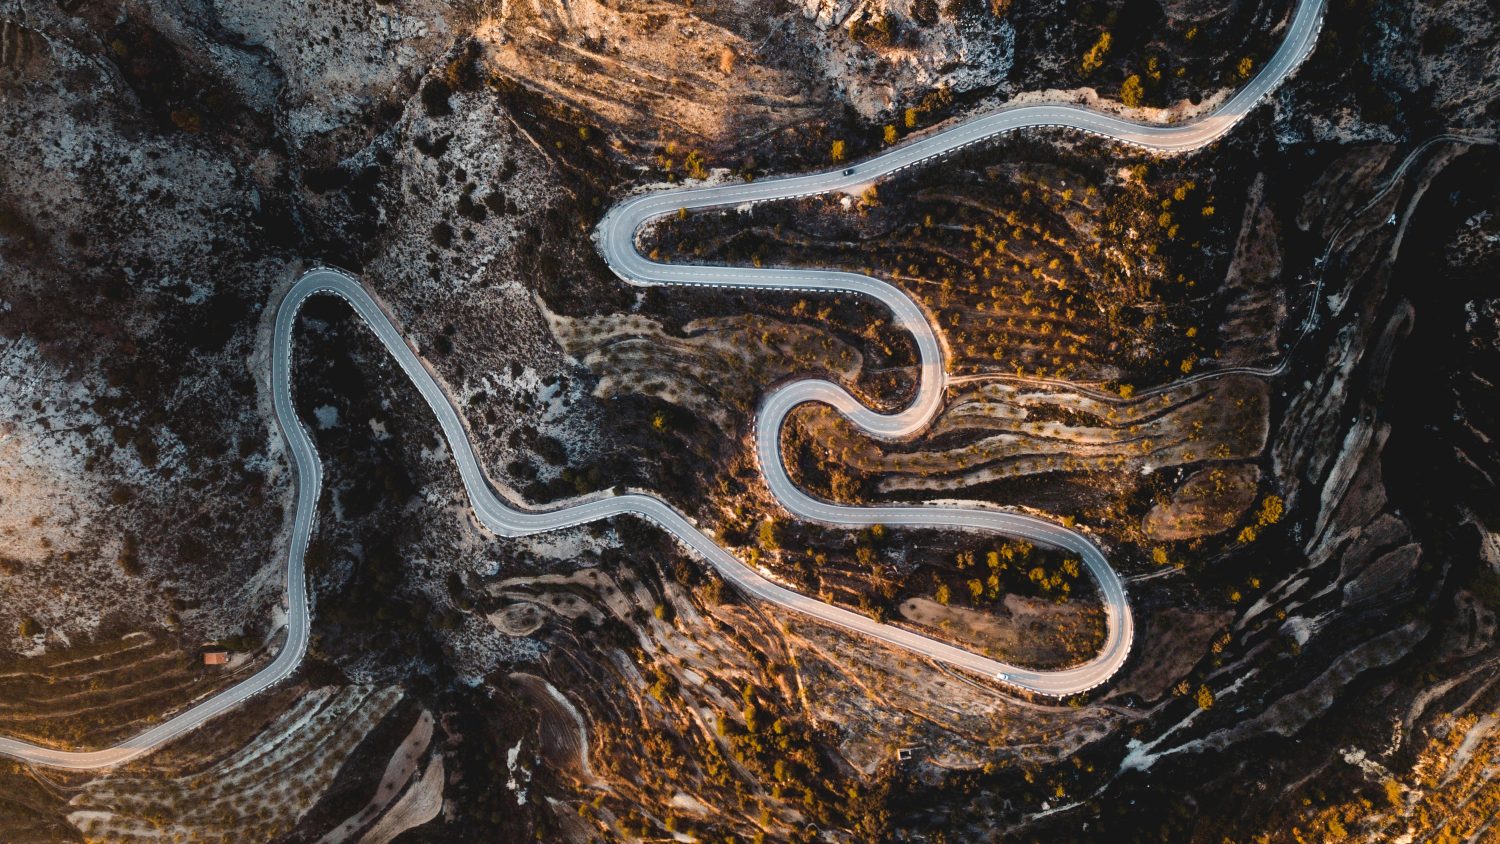 aerial photography of road